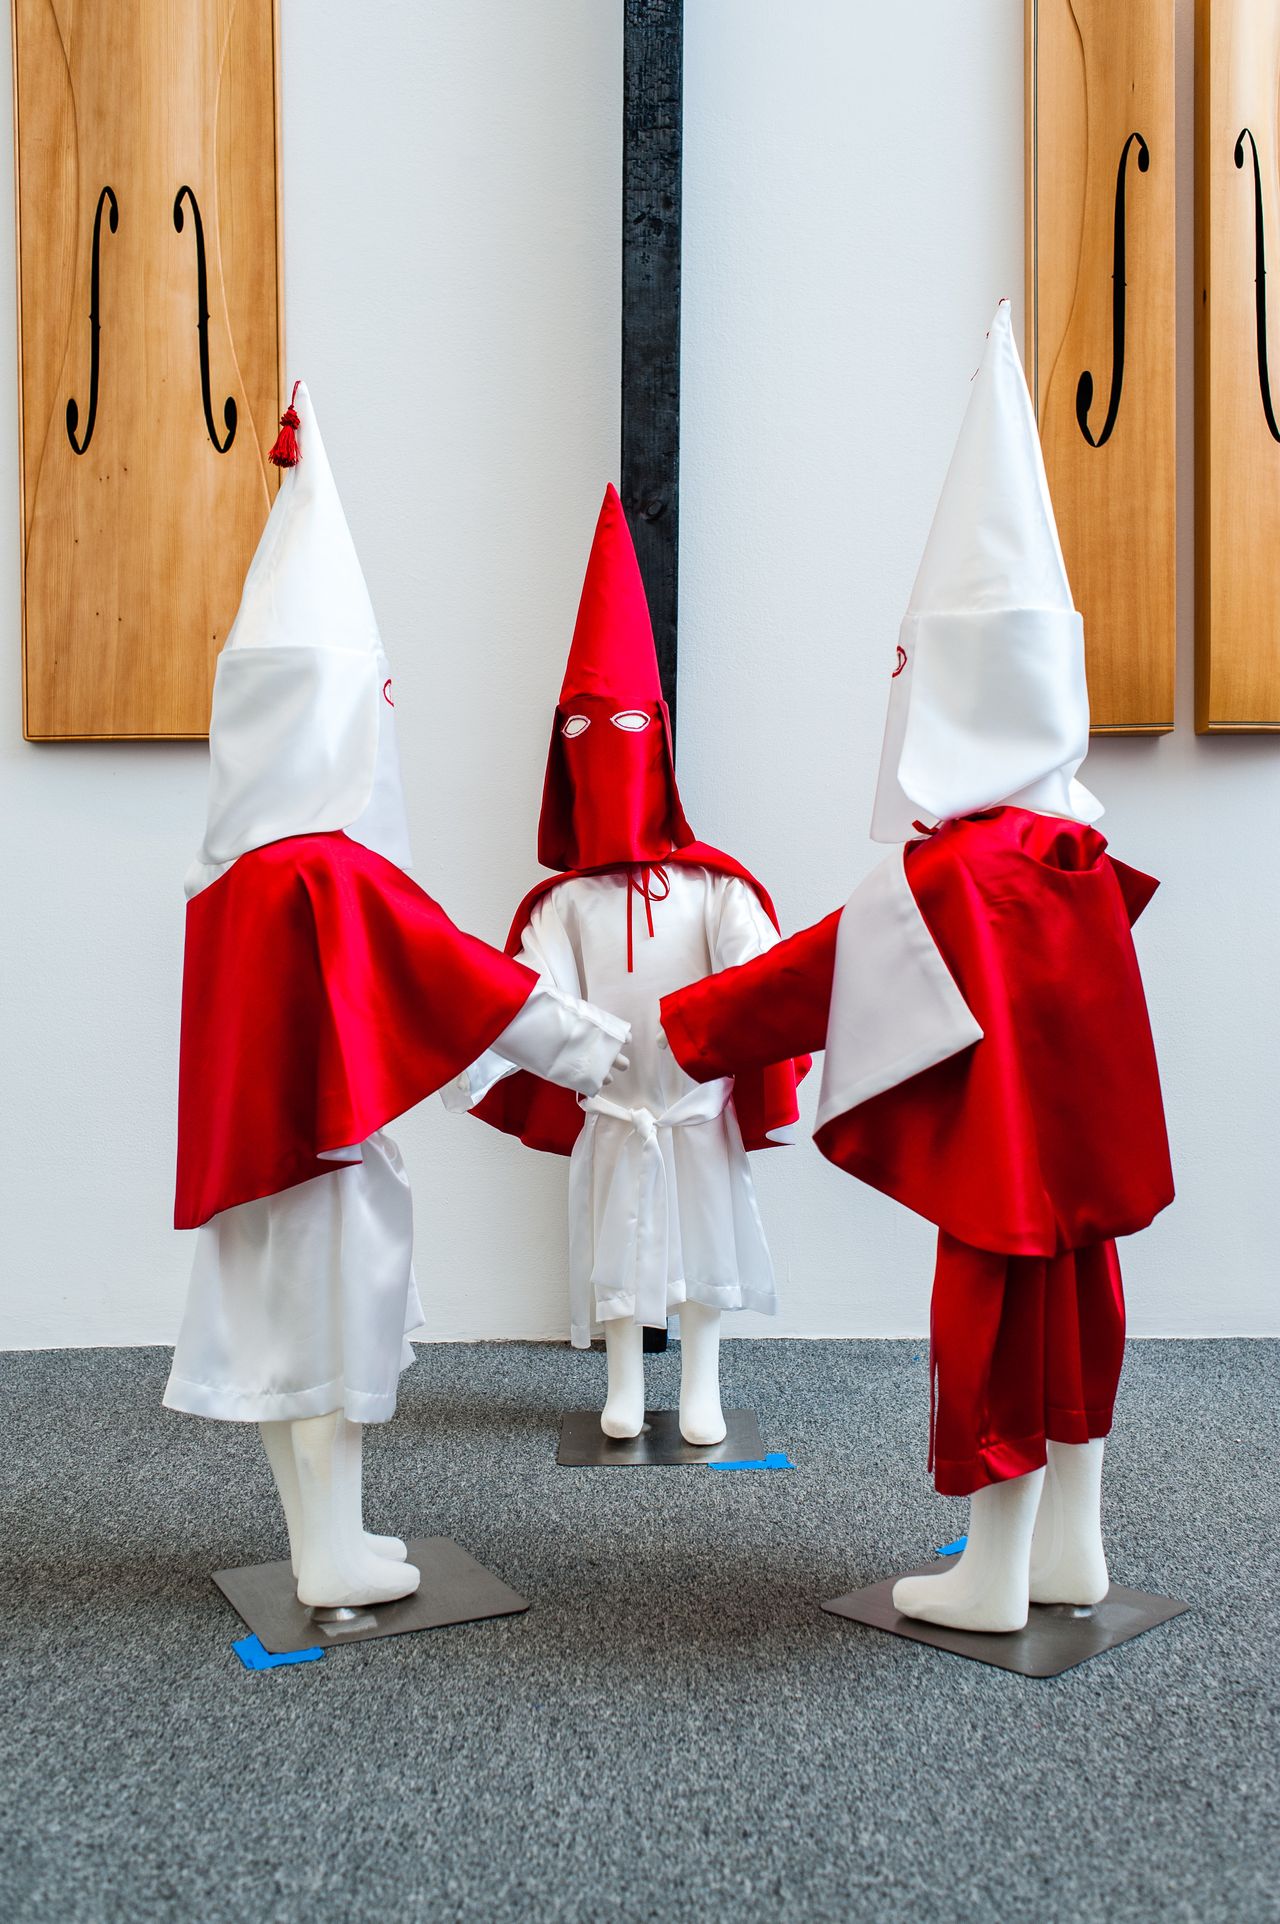 "Storm in a Time of Shelter," 2015: "For this piece, I re-imagined Ku Klux Klan robes from my memories of rallies growing up in the South. The centerpiece is a charred cross inscribed with hymns that were common in my childhood. Some of these were sung by the KKK, such as ‘The Old Rugged Cross.’ A well-known photo easily found online shows a toddler dressed in a Klan robe, face-to-face with a black state trooper. It made me ponder the learned aspects of fear, faith, hatred, and love."